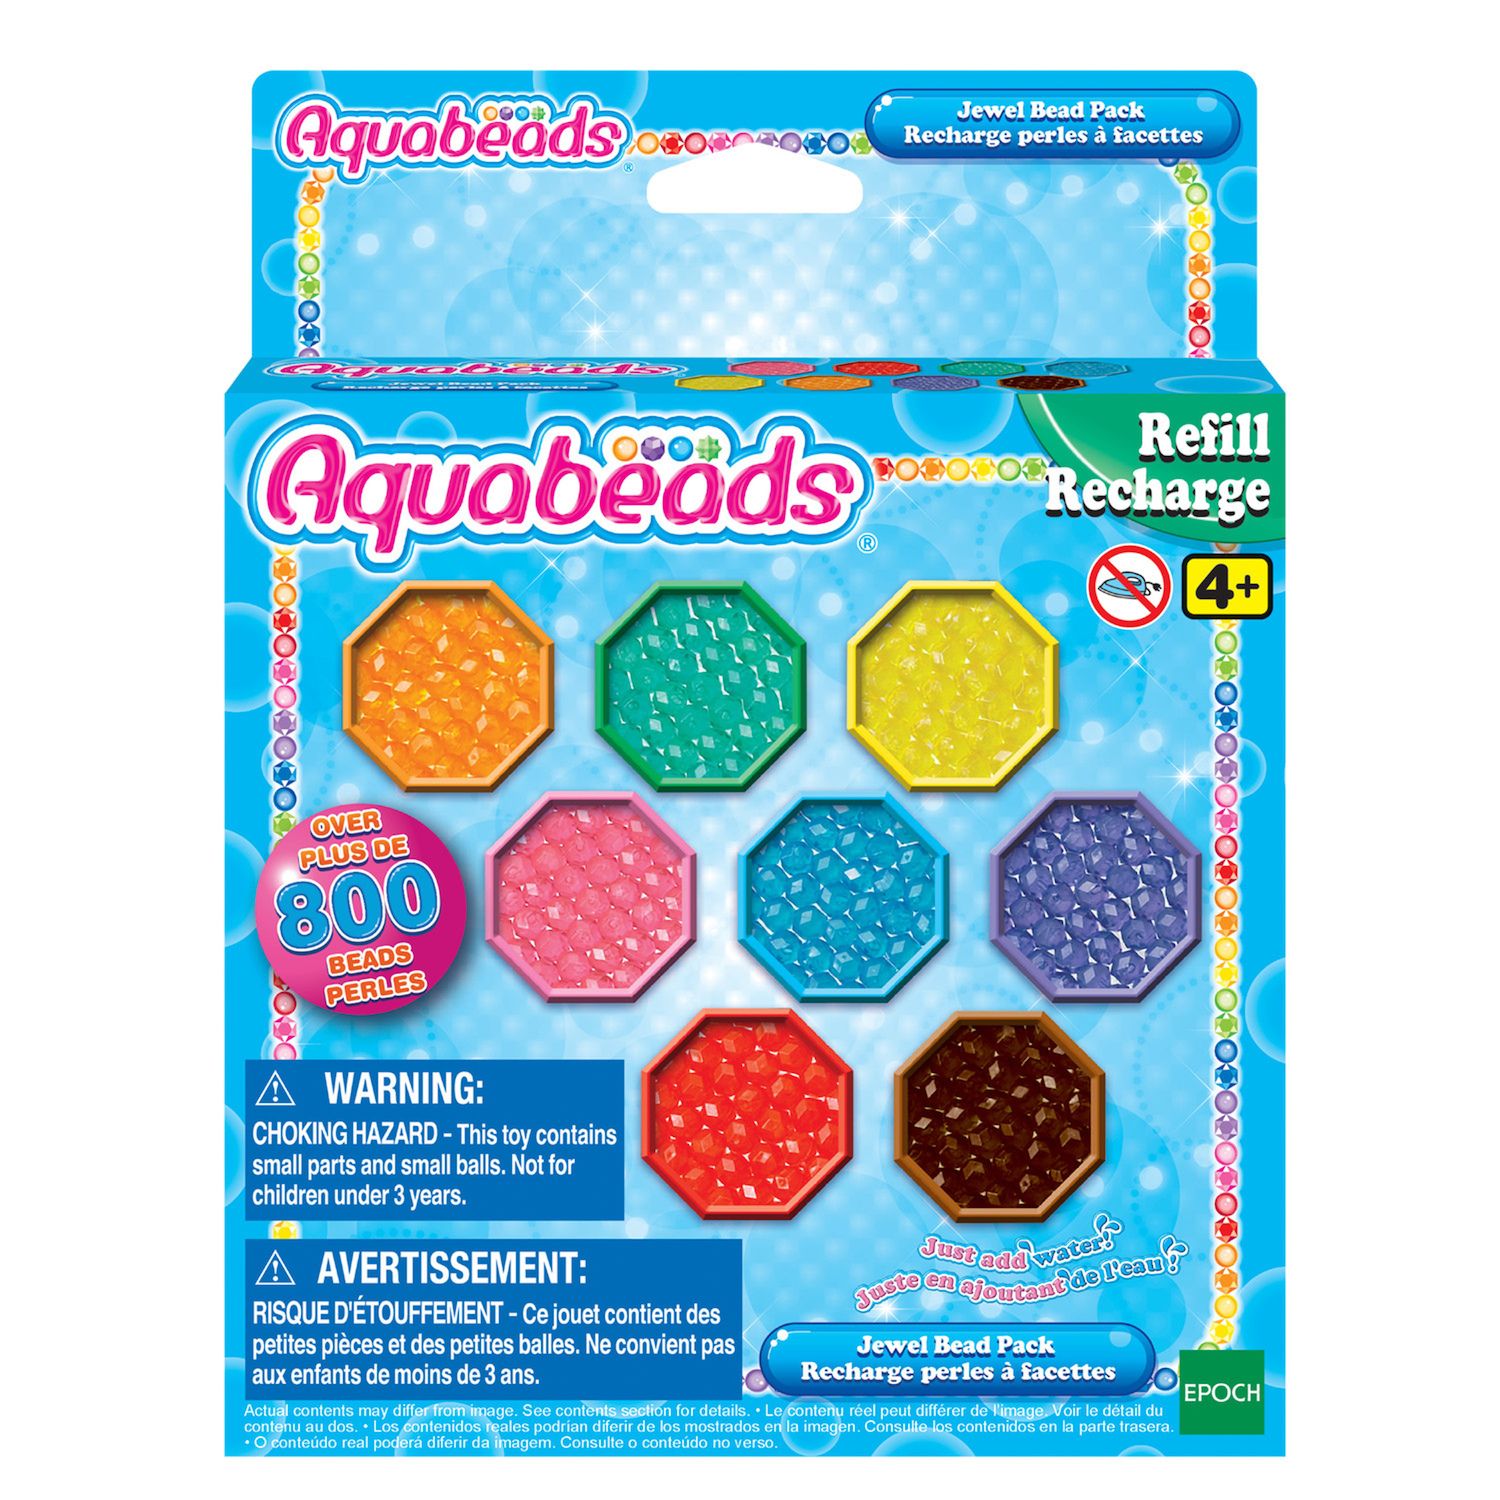 About – Beads Pack